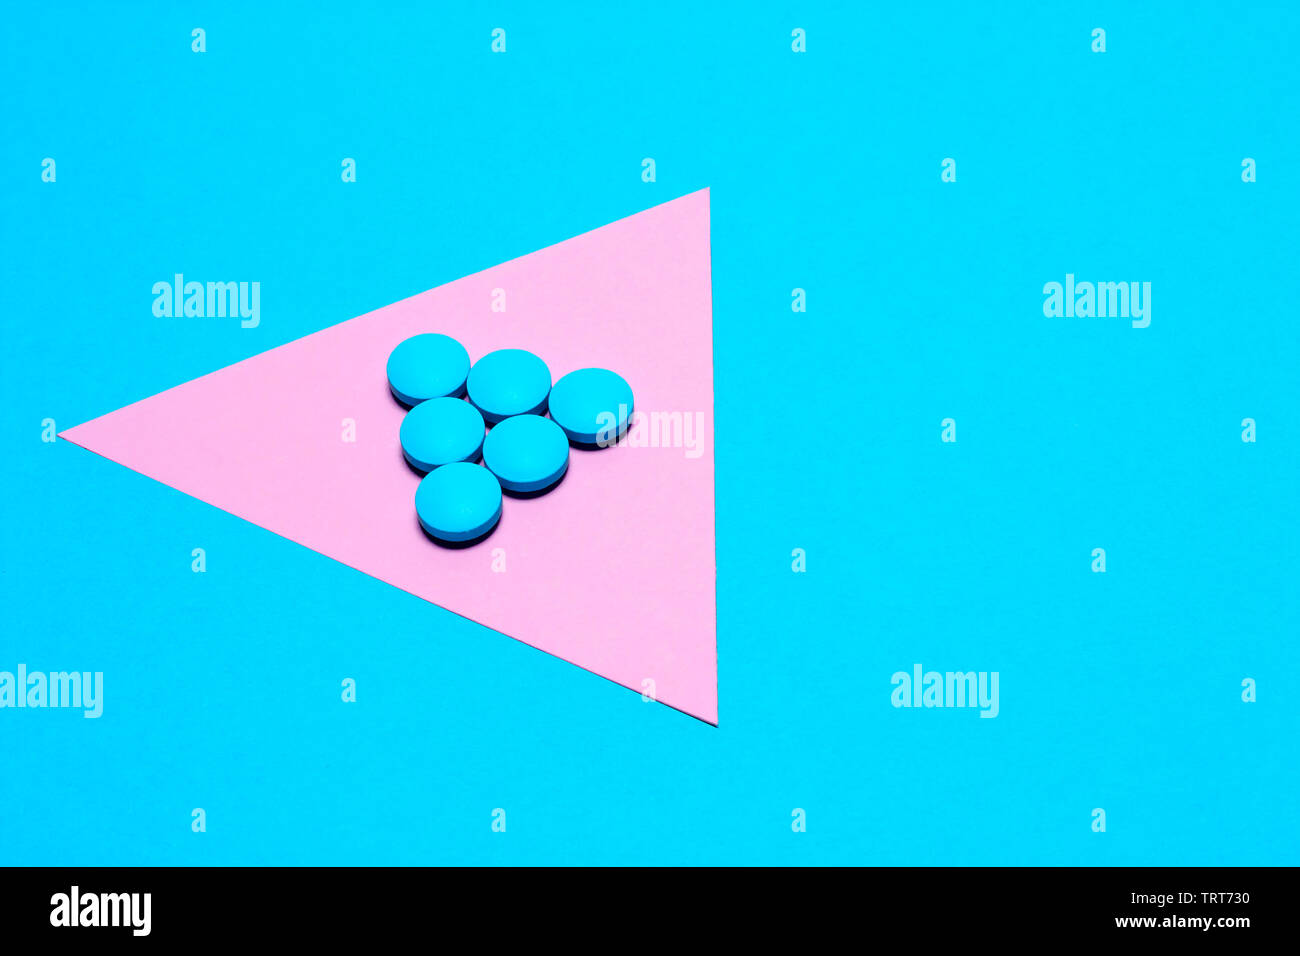 blue tablets laid out in the form of a triangle or an arrow on a paper background of blue and pink. Medication and prescription pills minimalistic fla Stock Photo